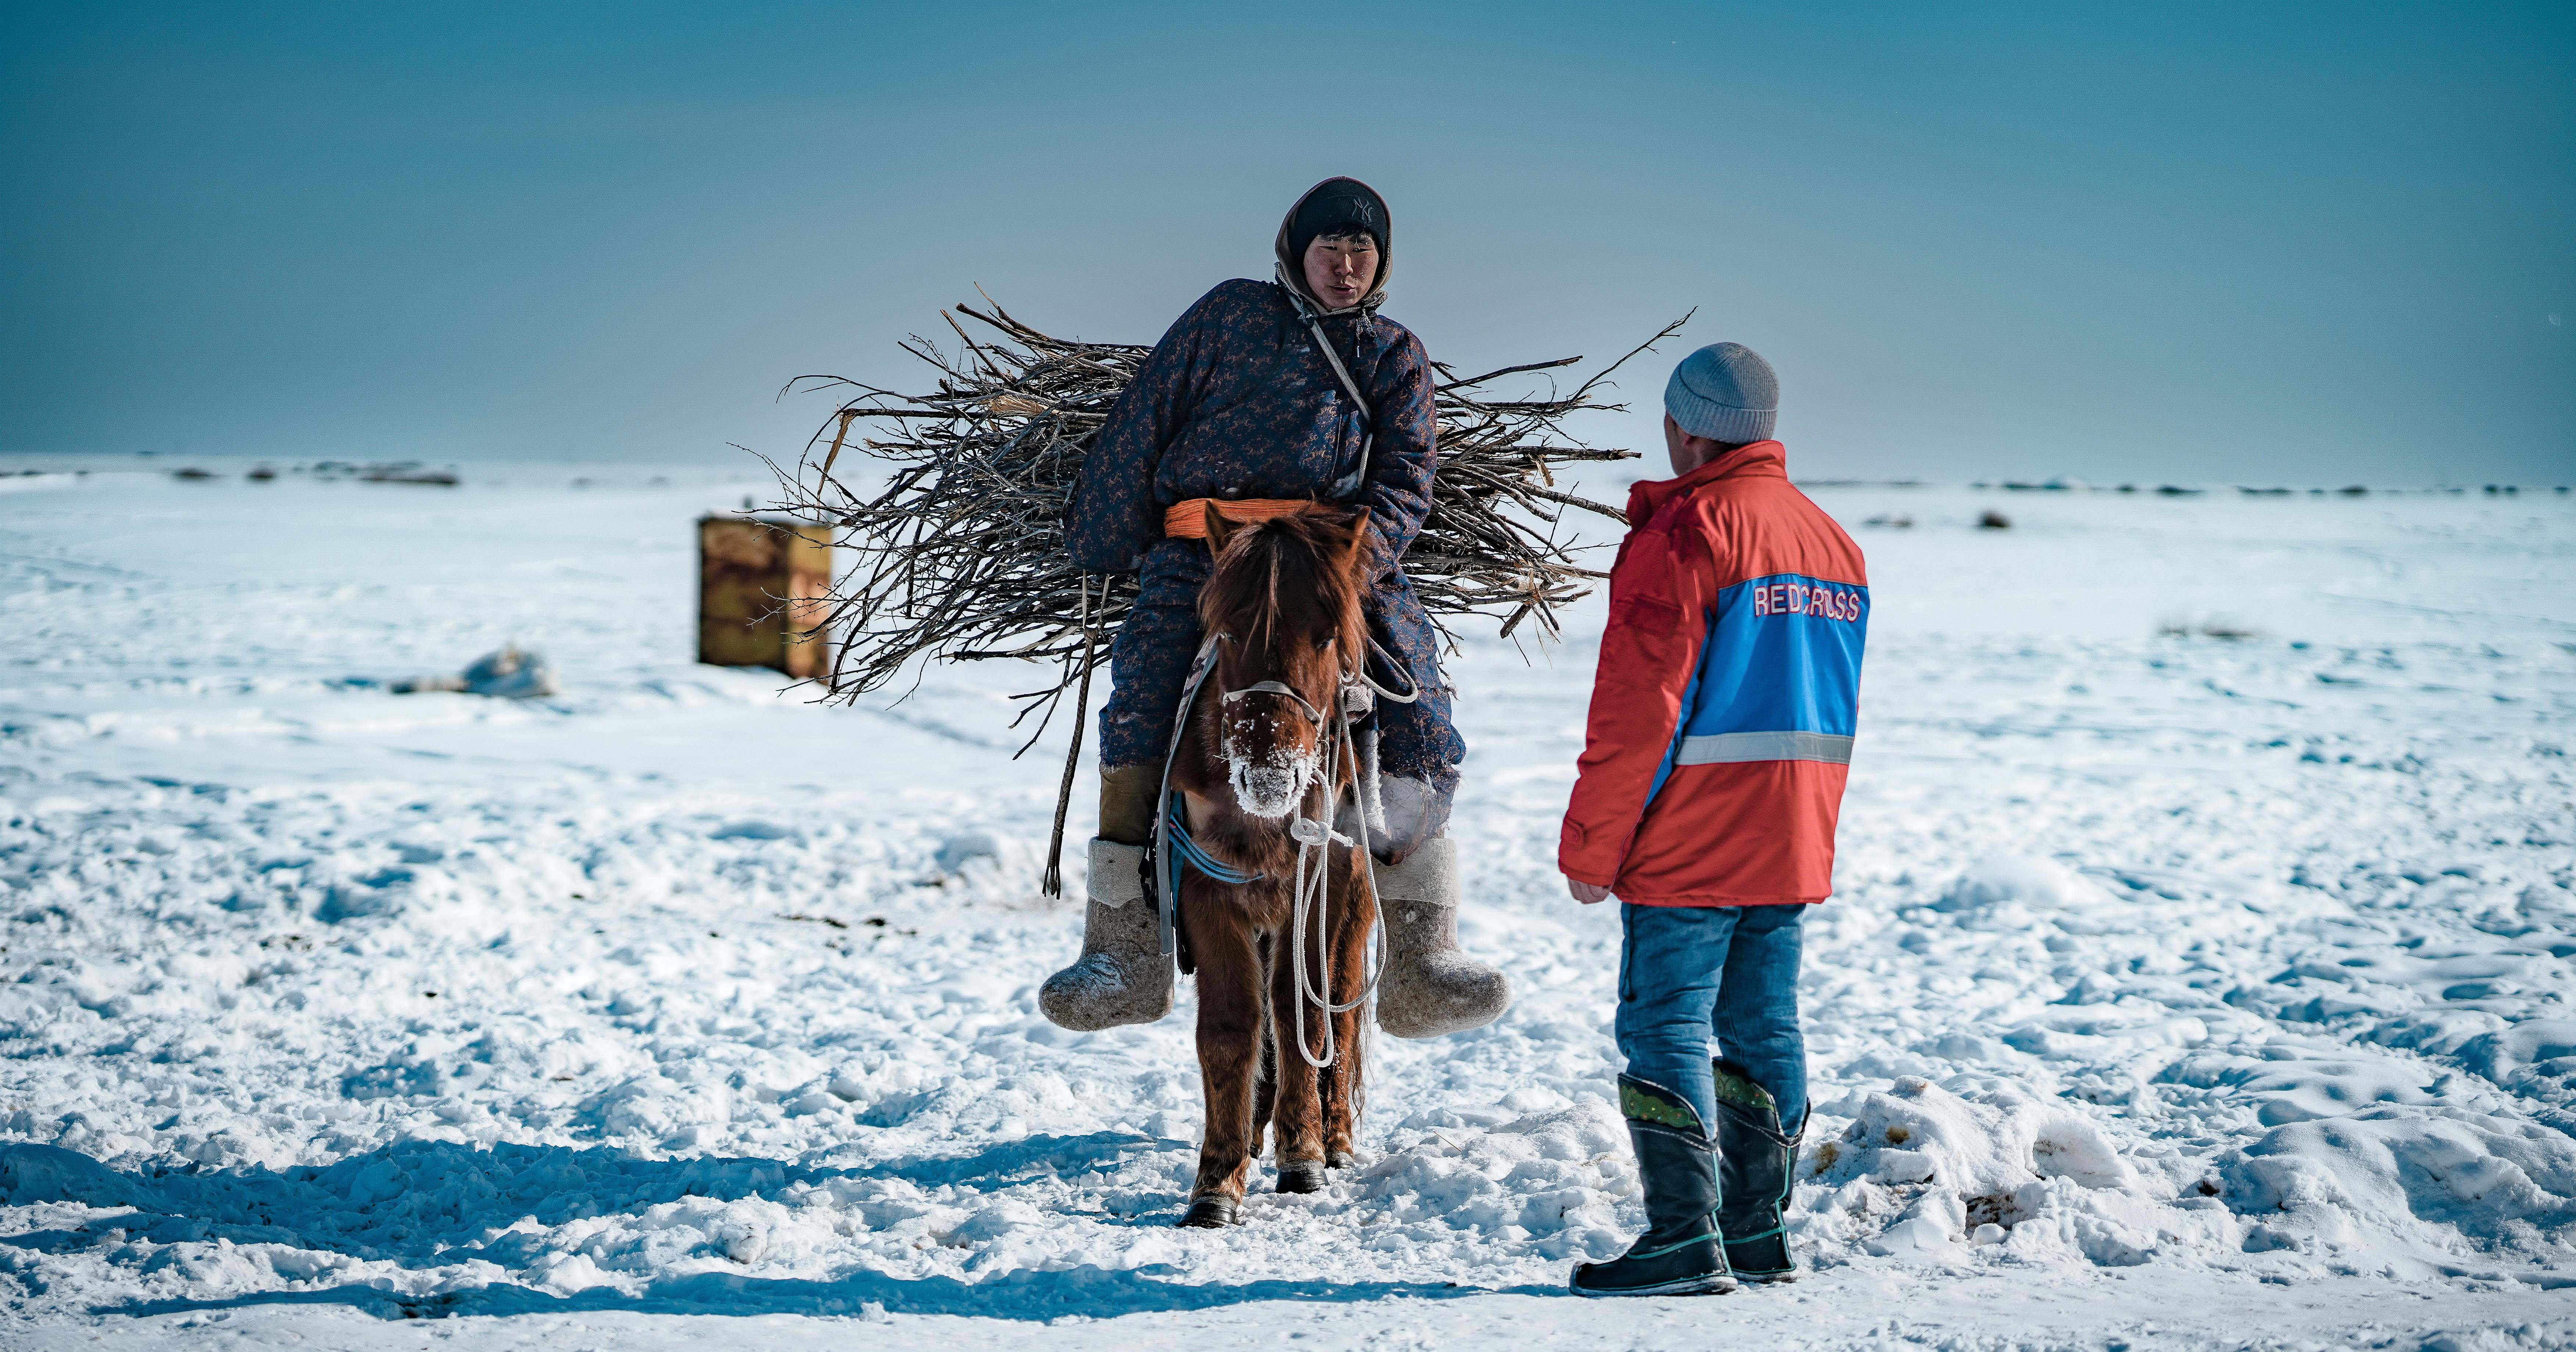 A Red Cross volunteer talking to a Mongolian person in a wintry landscape.